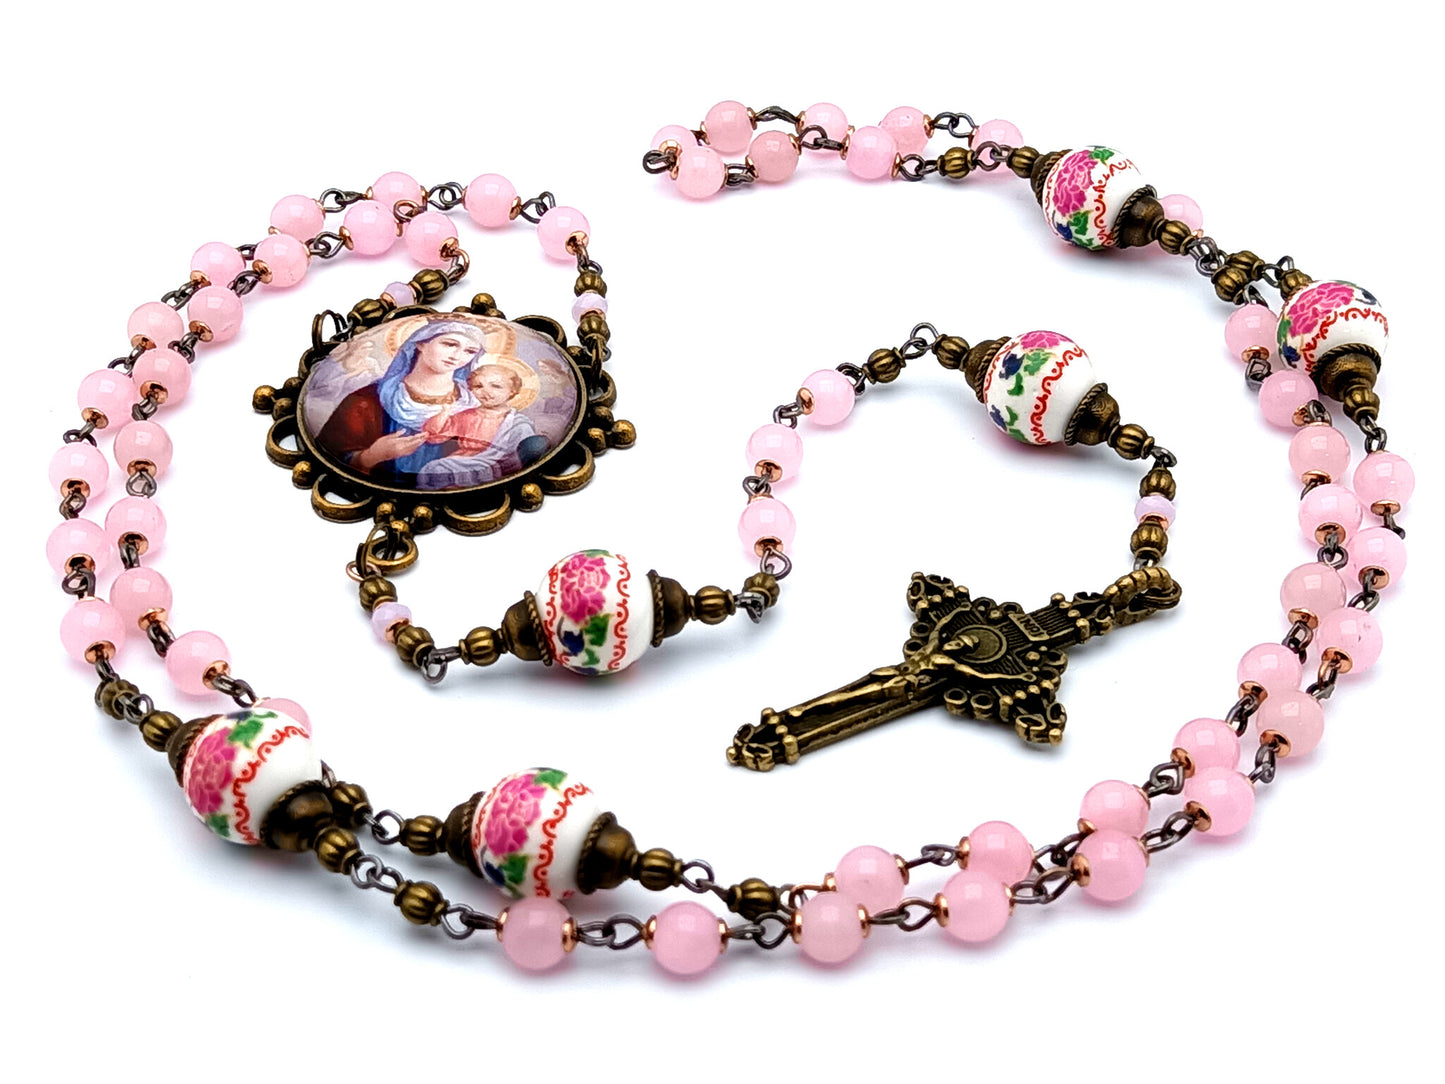 Our Lady of Perpetual help unique rosary beads with vintage style rose quartz gemstone and porcelain beads and a brass crucifix.